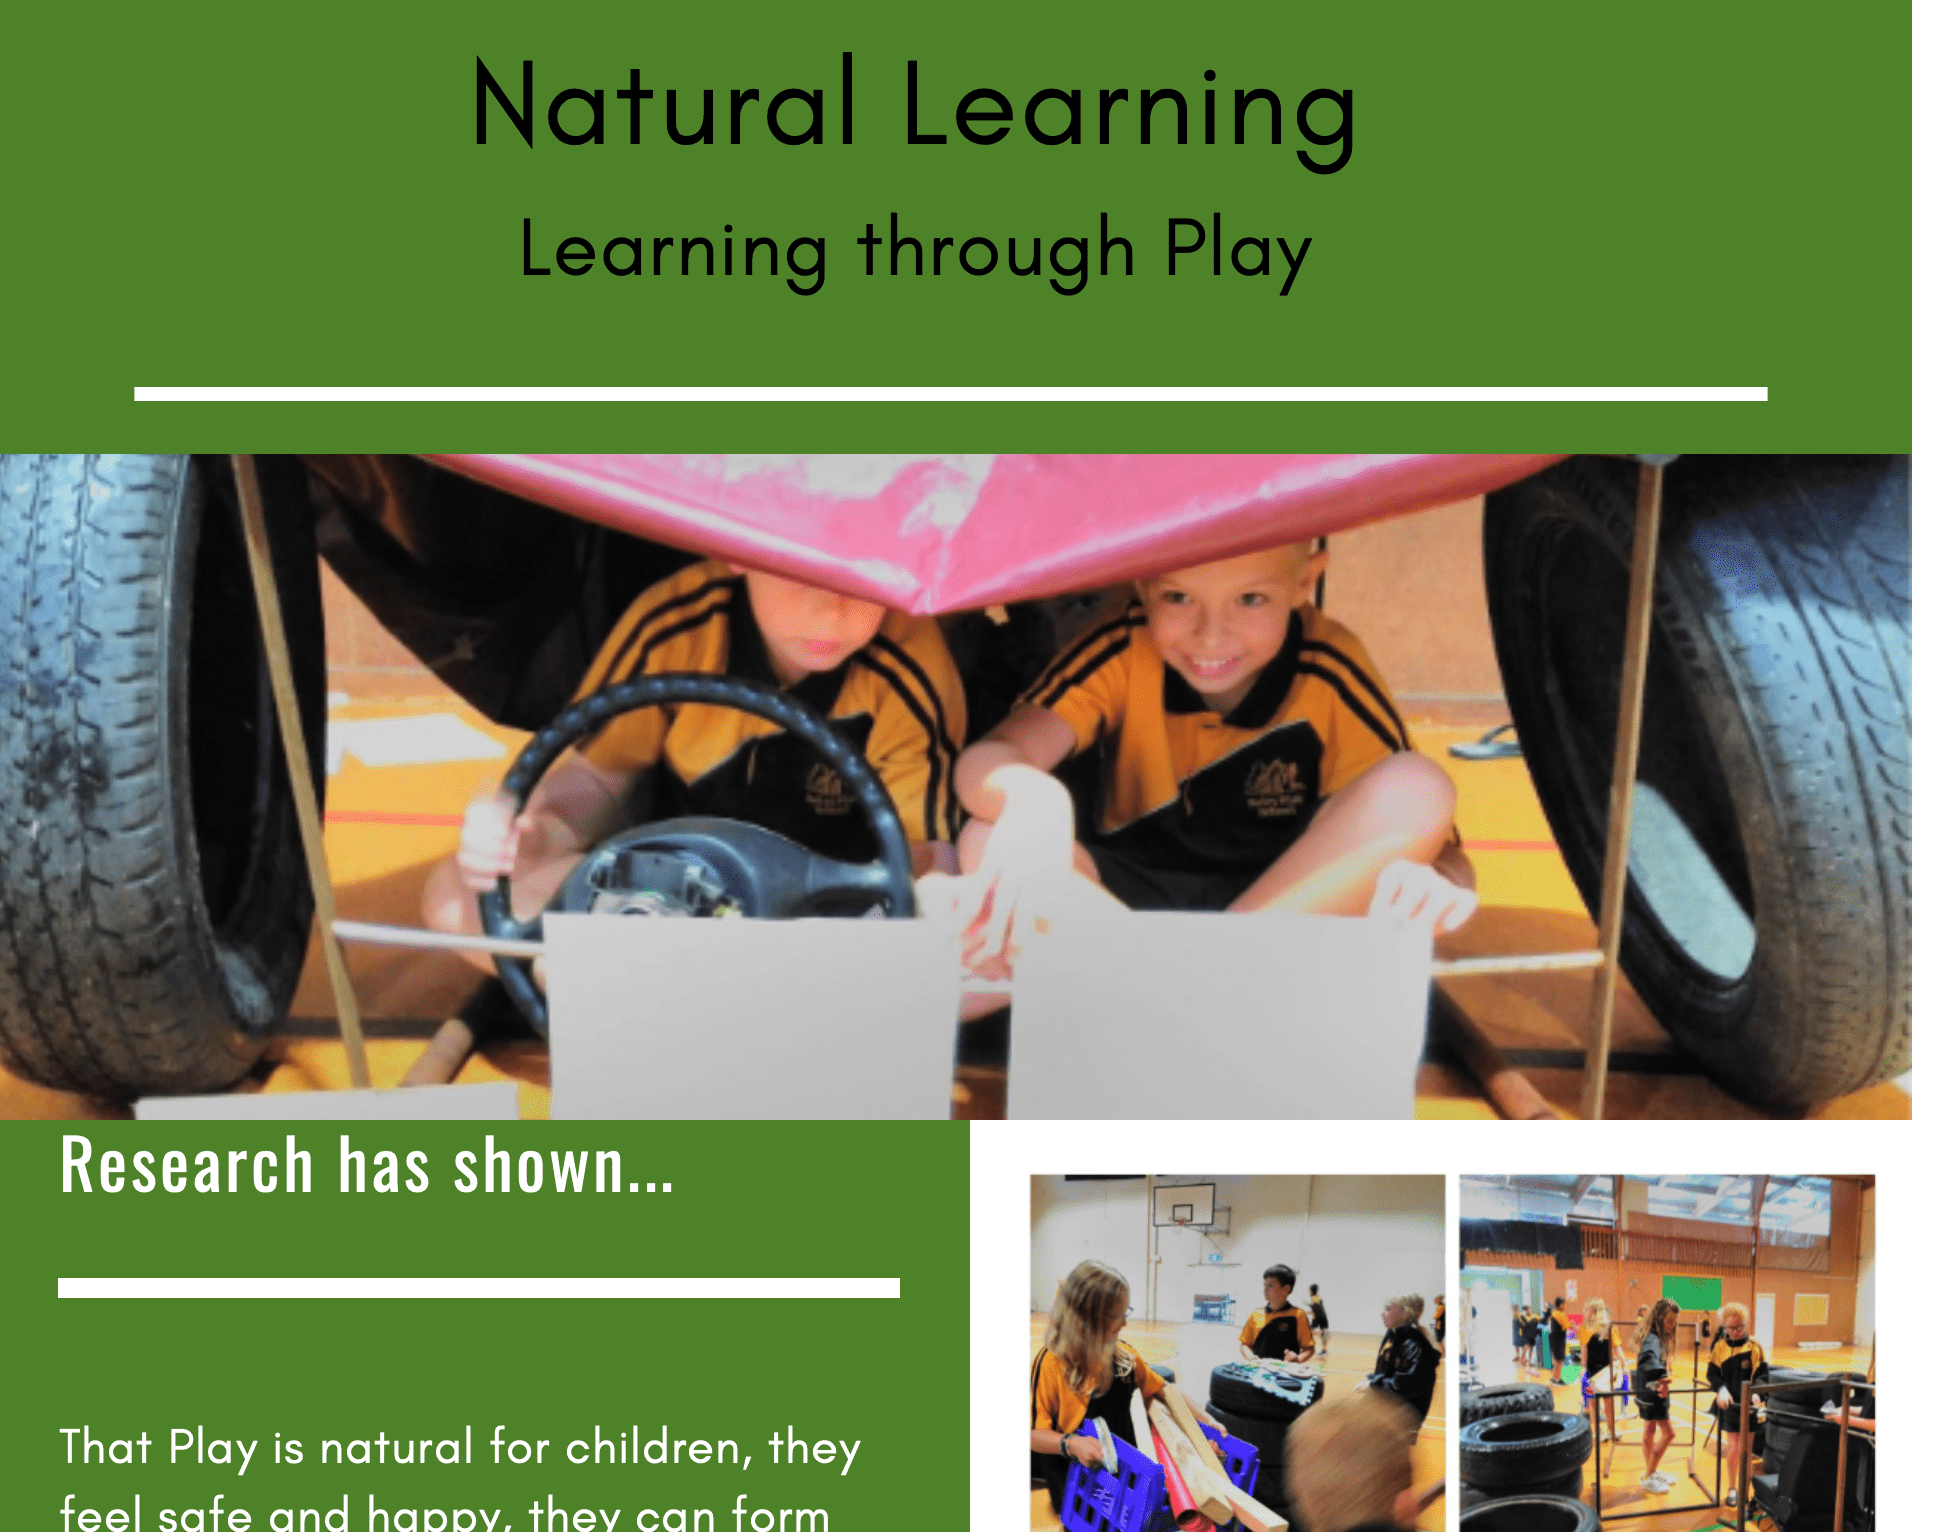 Natural Learning and Play - 2022 Newsletter